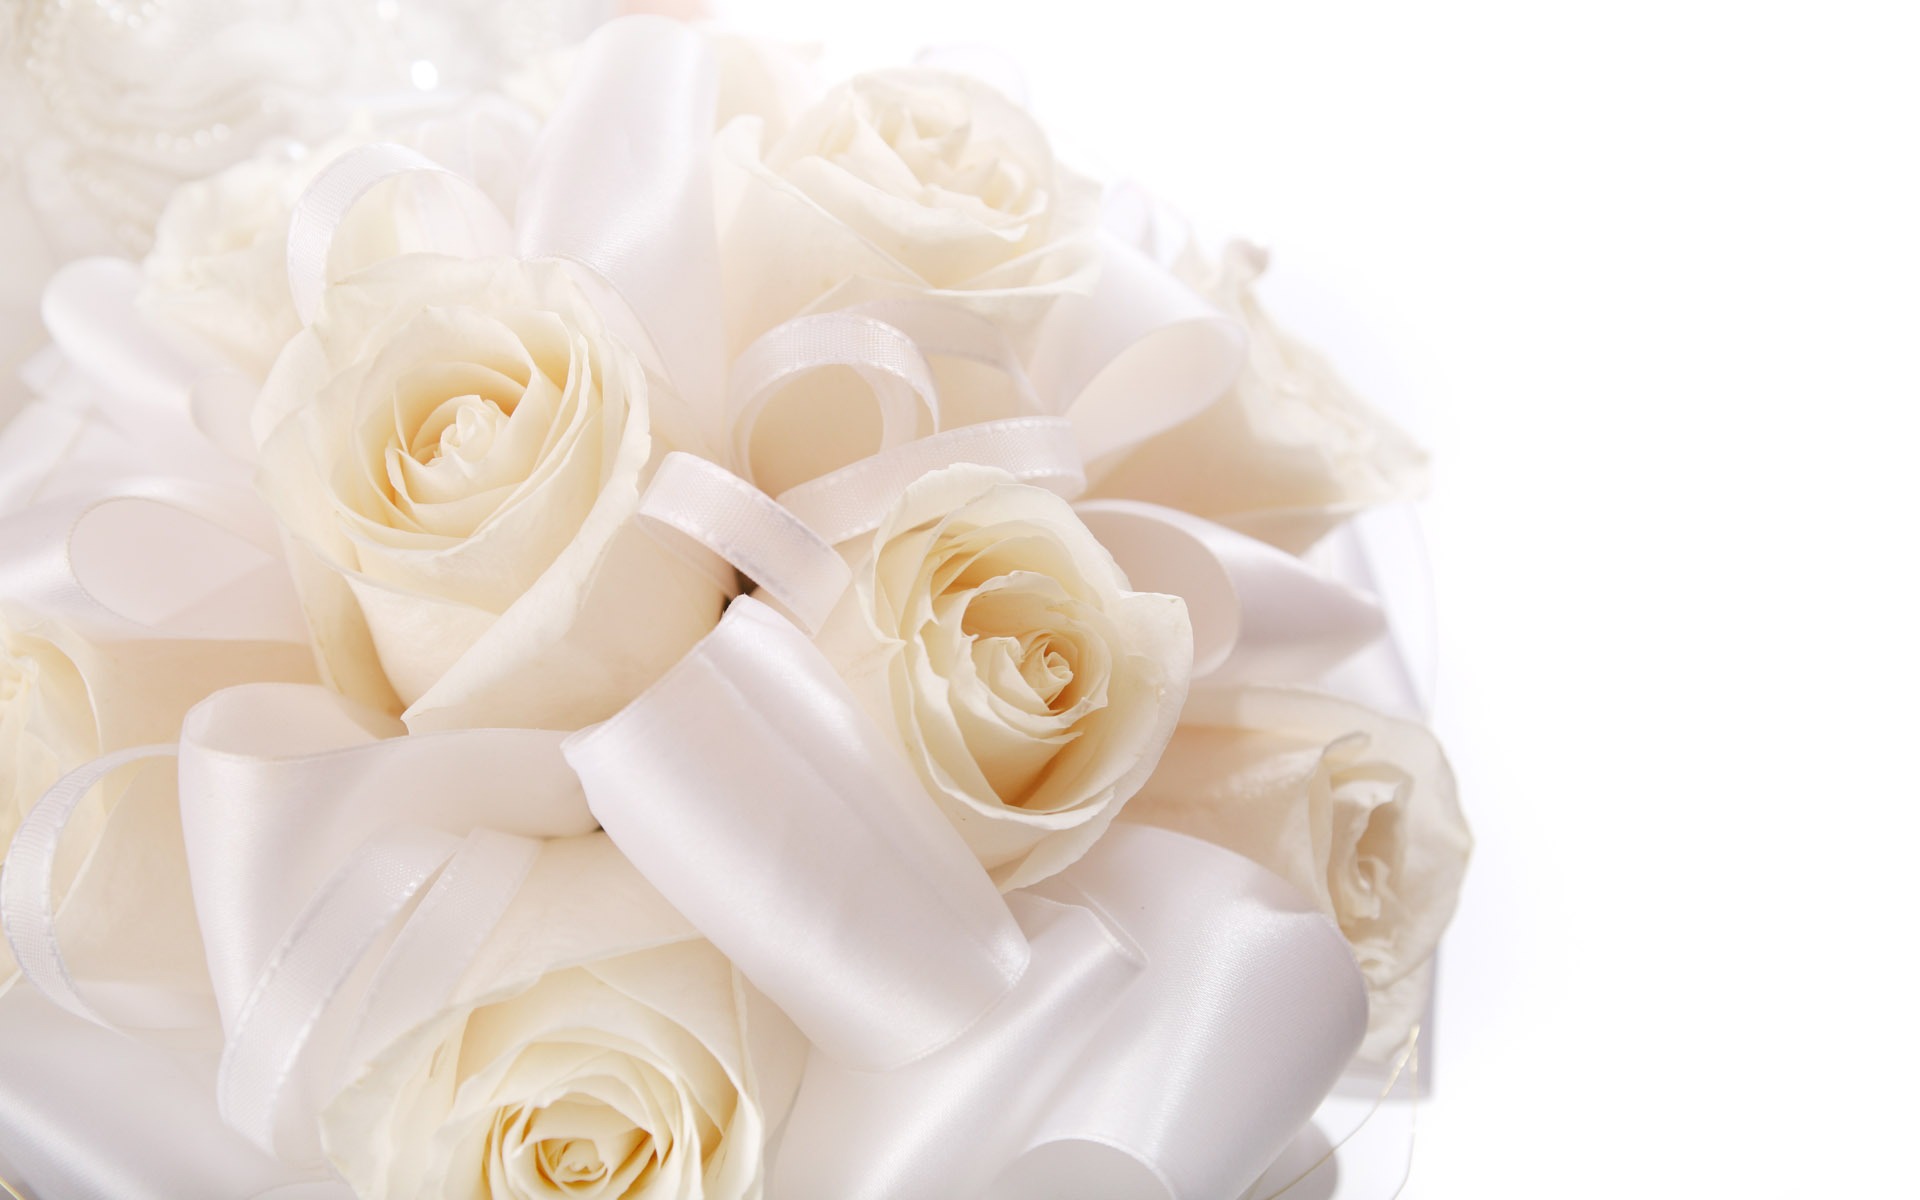 Weddings and Flowers wallpaper (1) #4 - 1920x1200